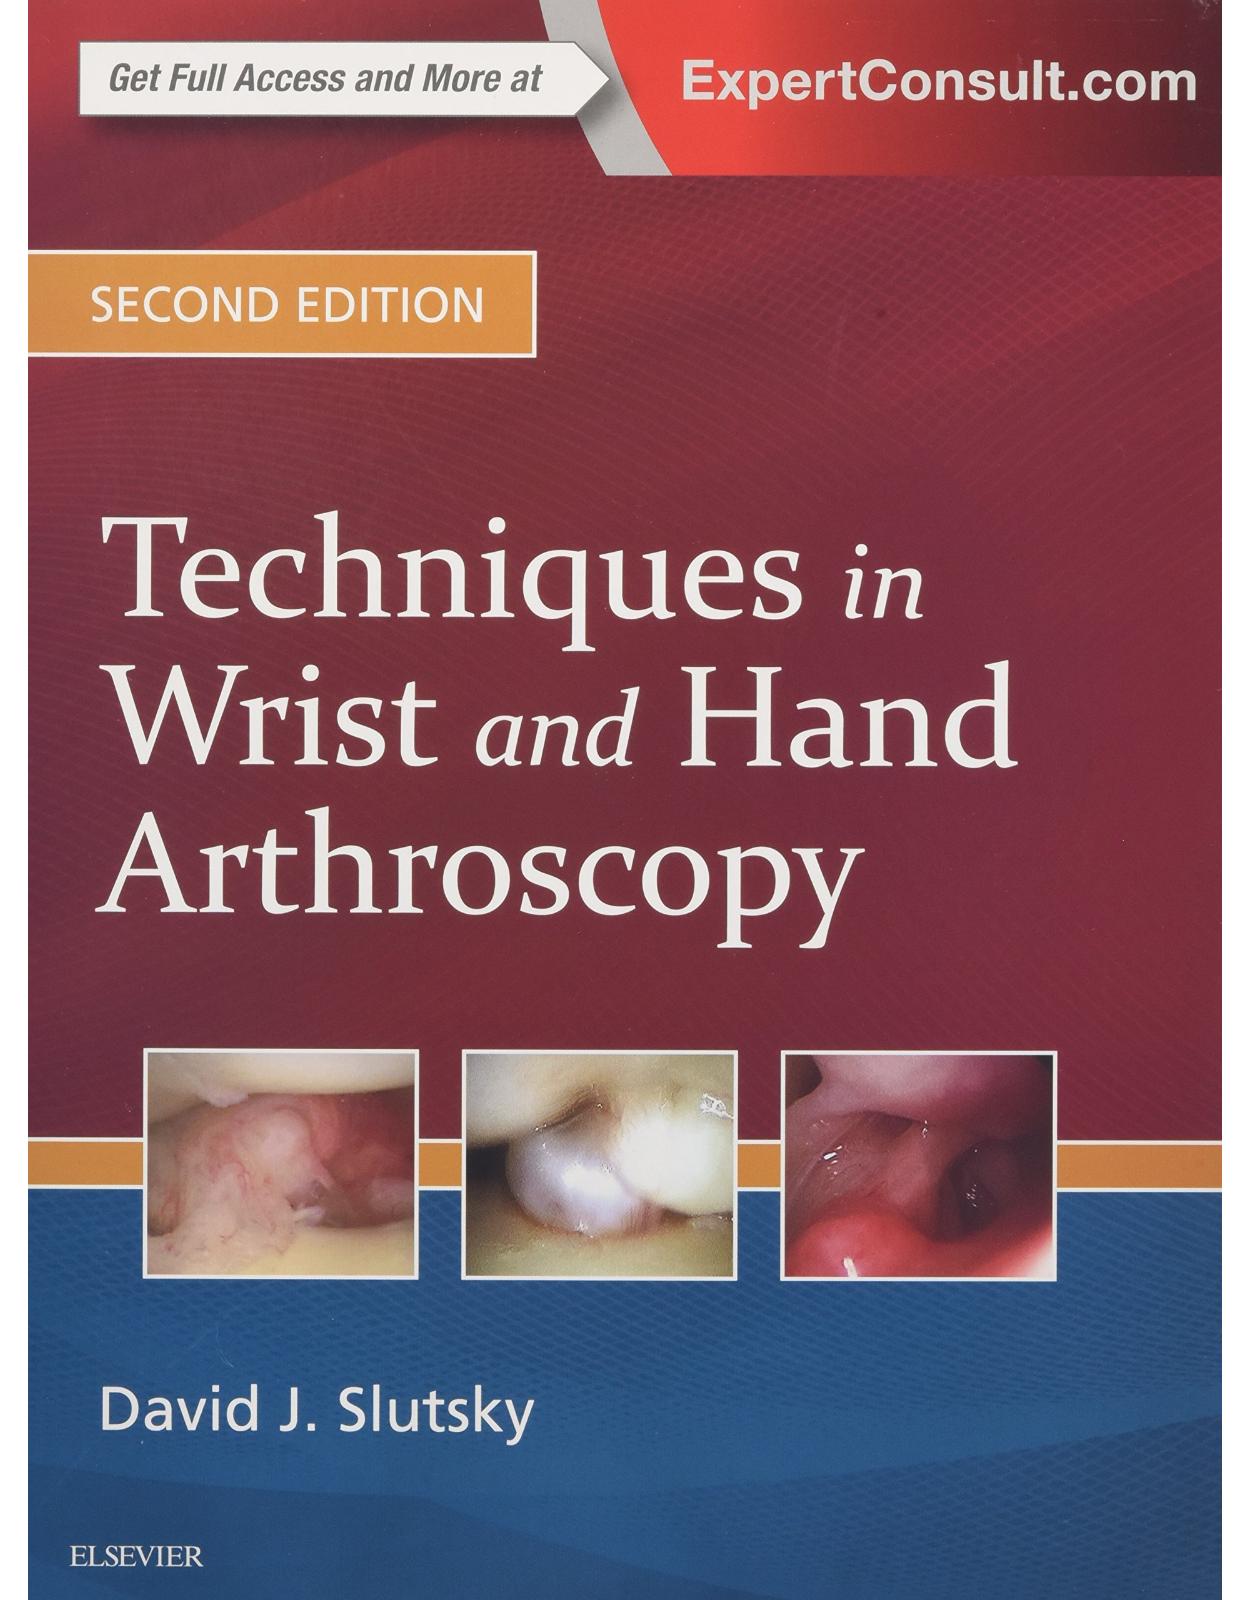 Techniques in Wrist and Hand Arthroscopy, 2nd Edition